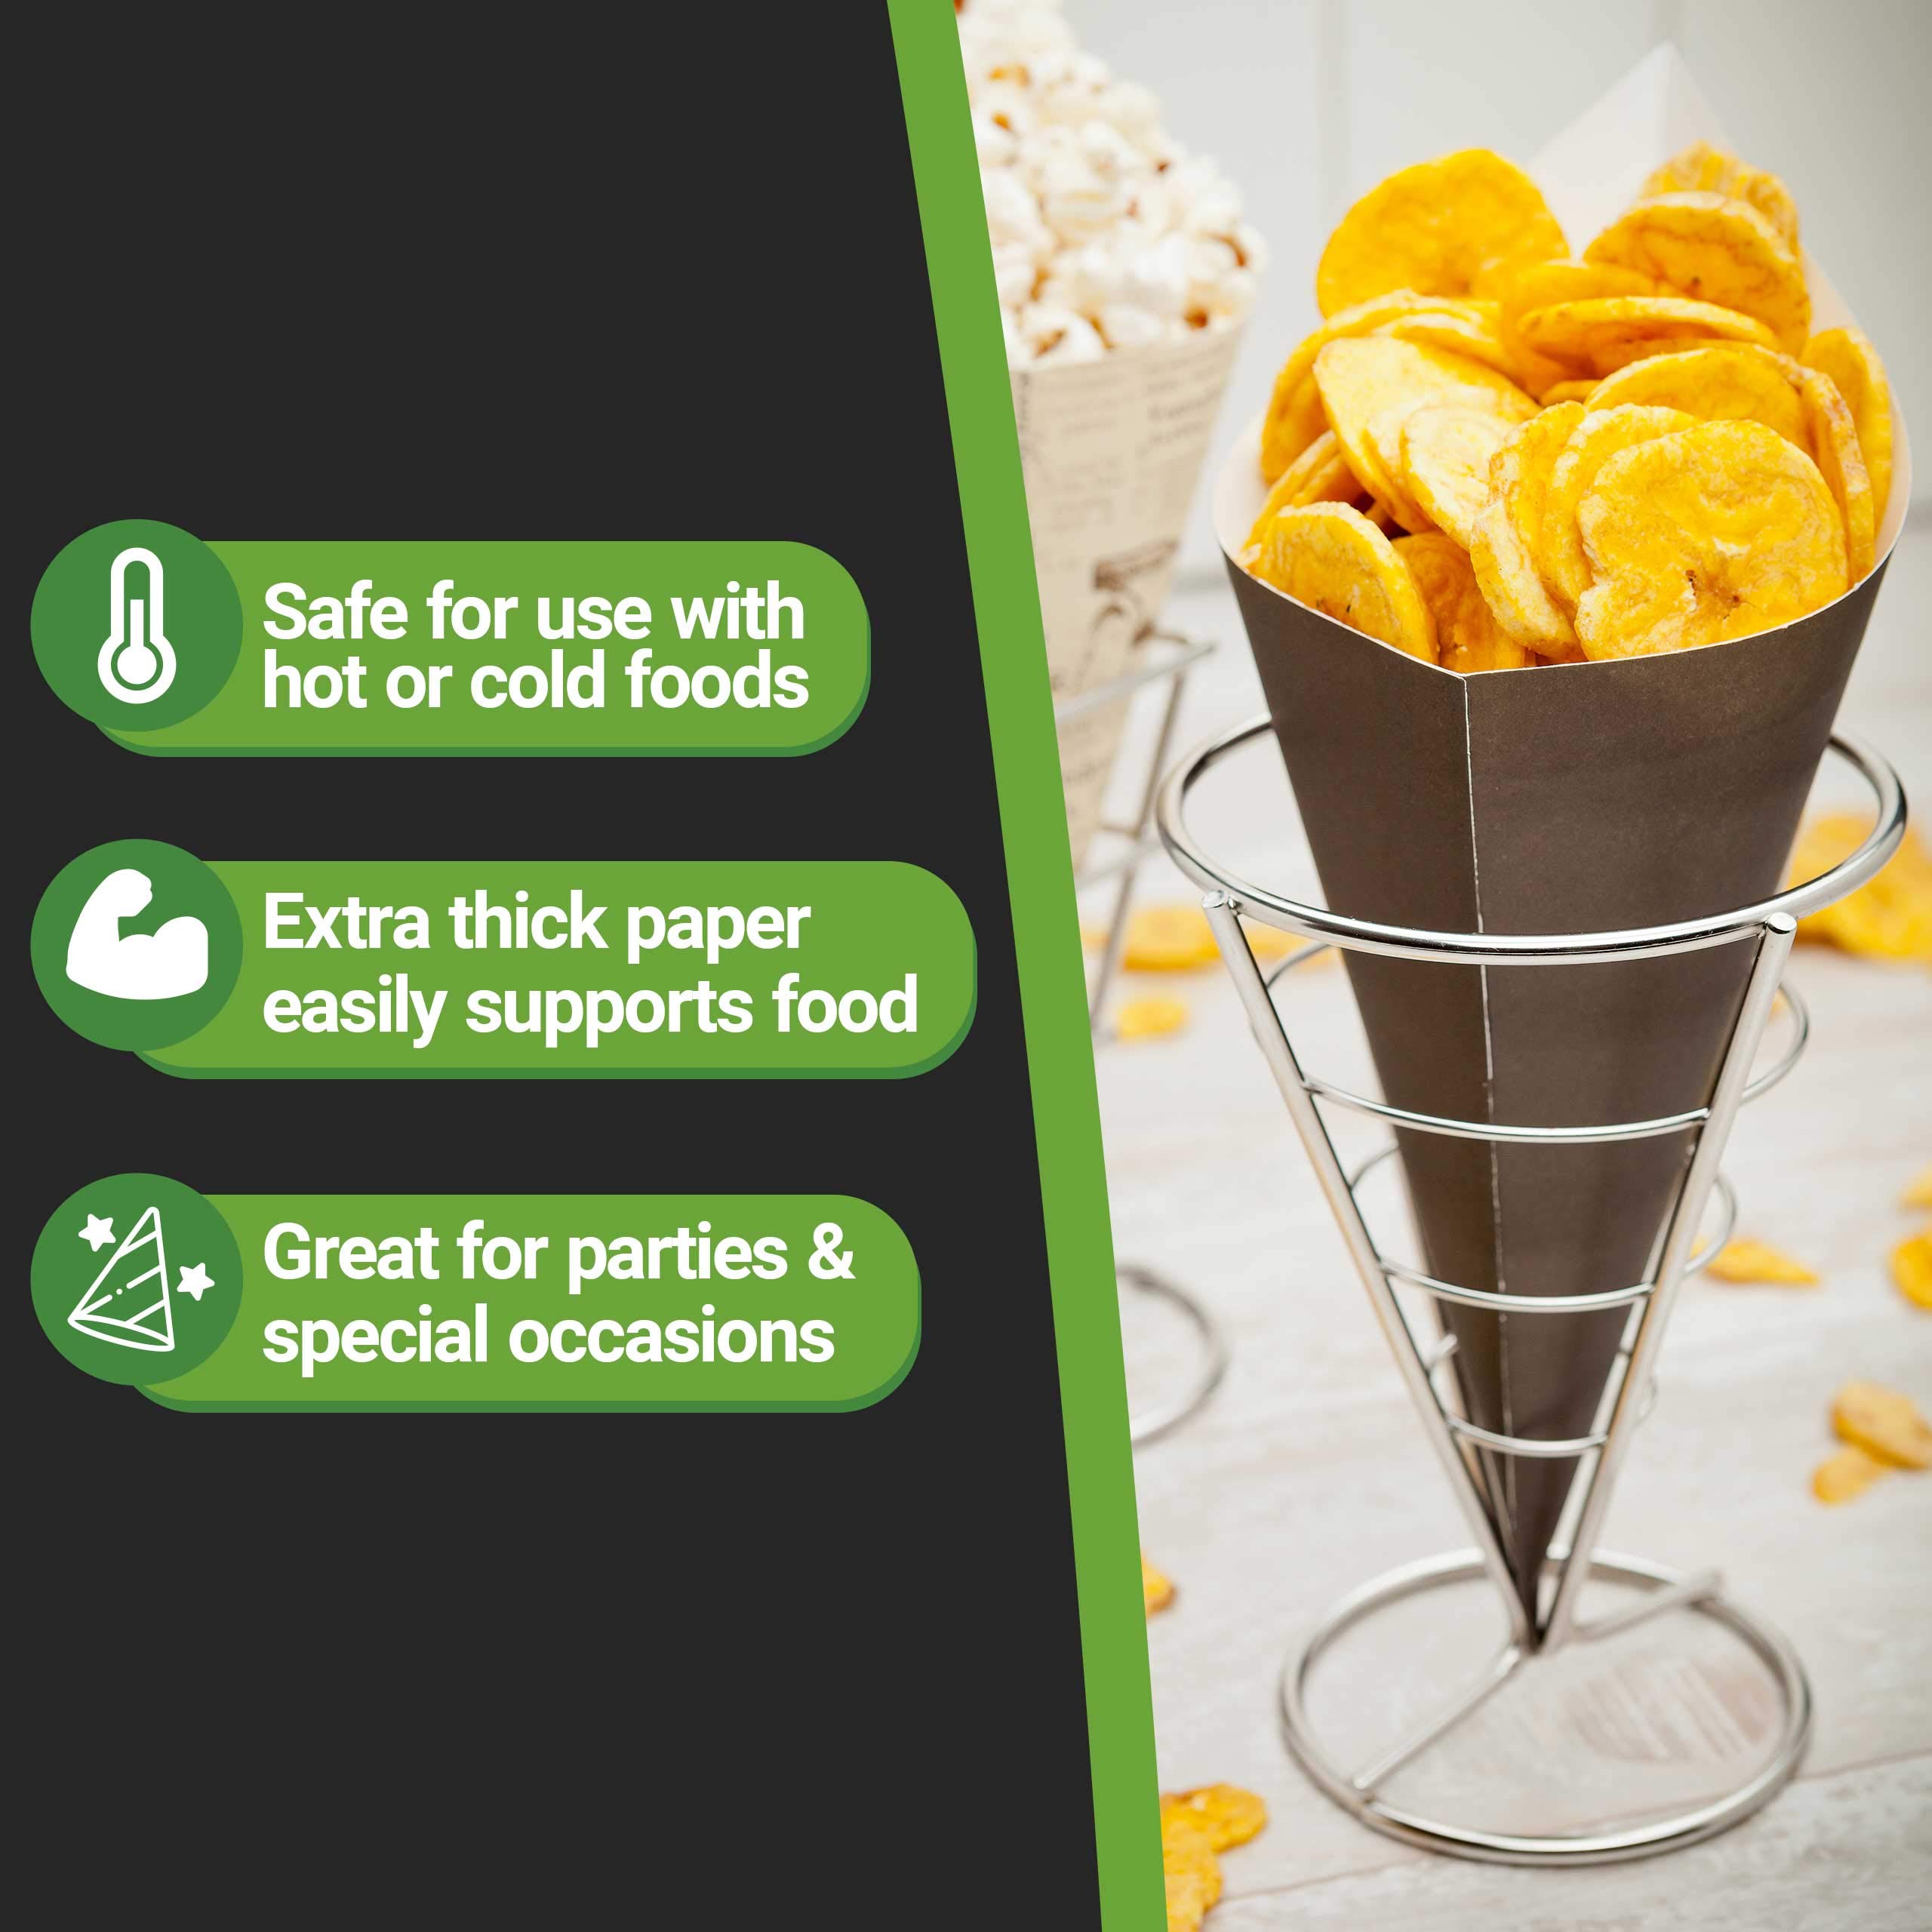 Restaurantware Conetek 10-Inch Eco-Friendly Black Finger Food Cones: Perfect for Appetizers - Food-Safe Paper Cone - Disposable and Recyclable - 100-CT - Restaurantware